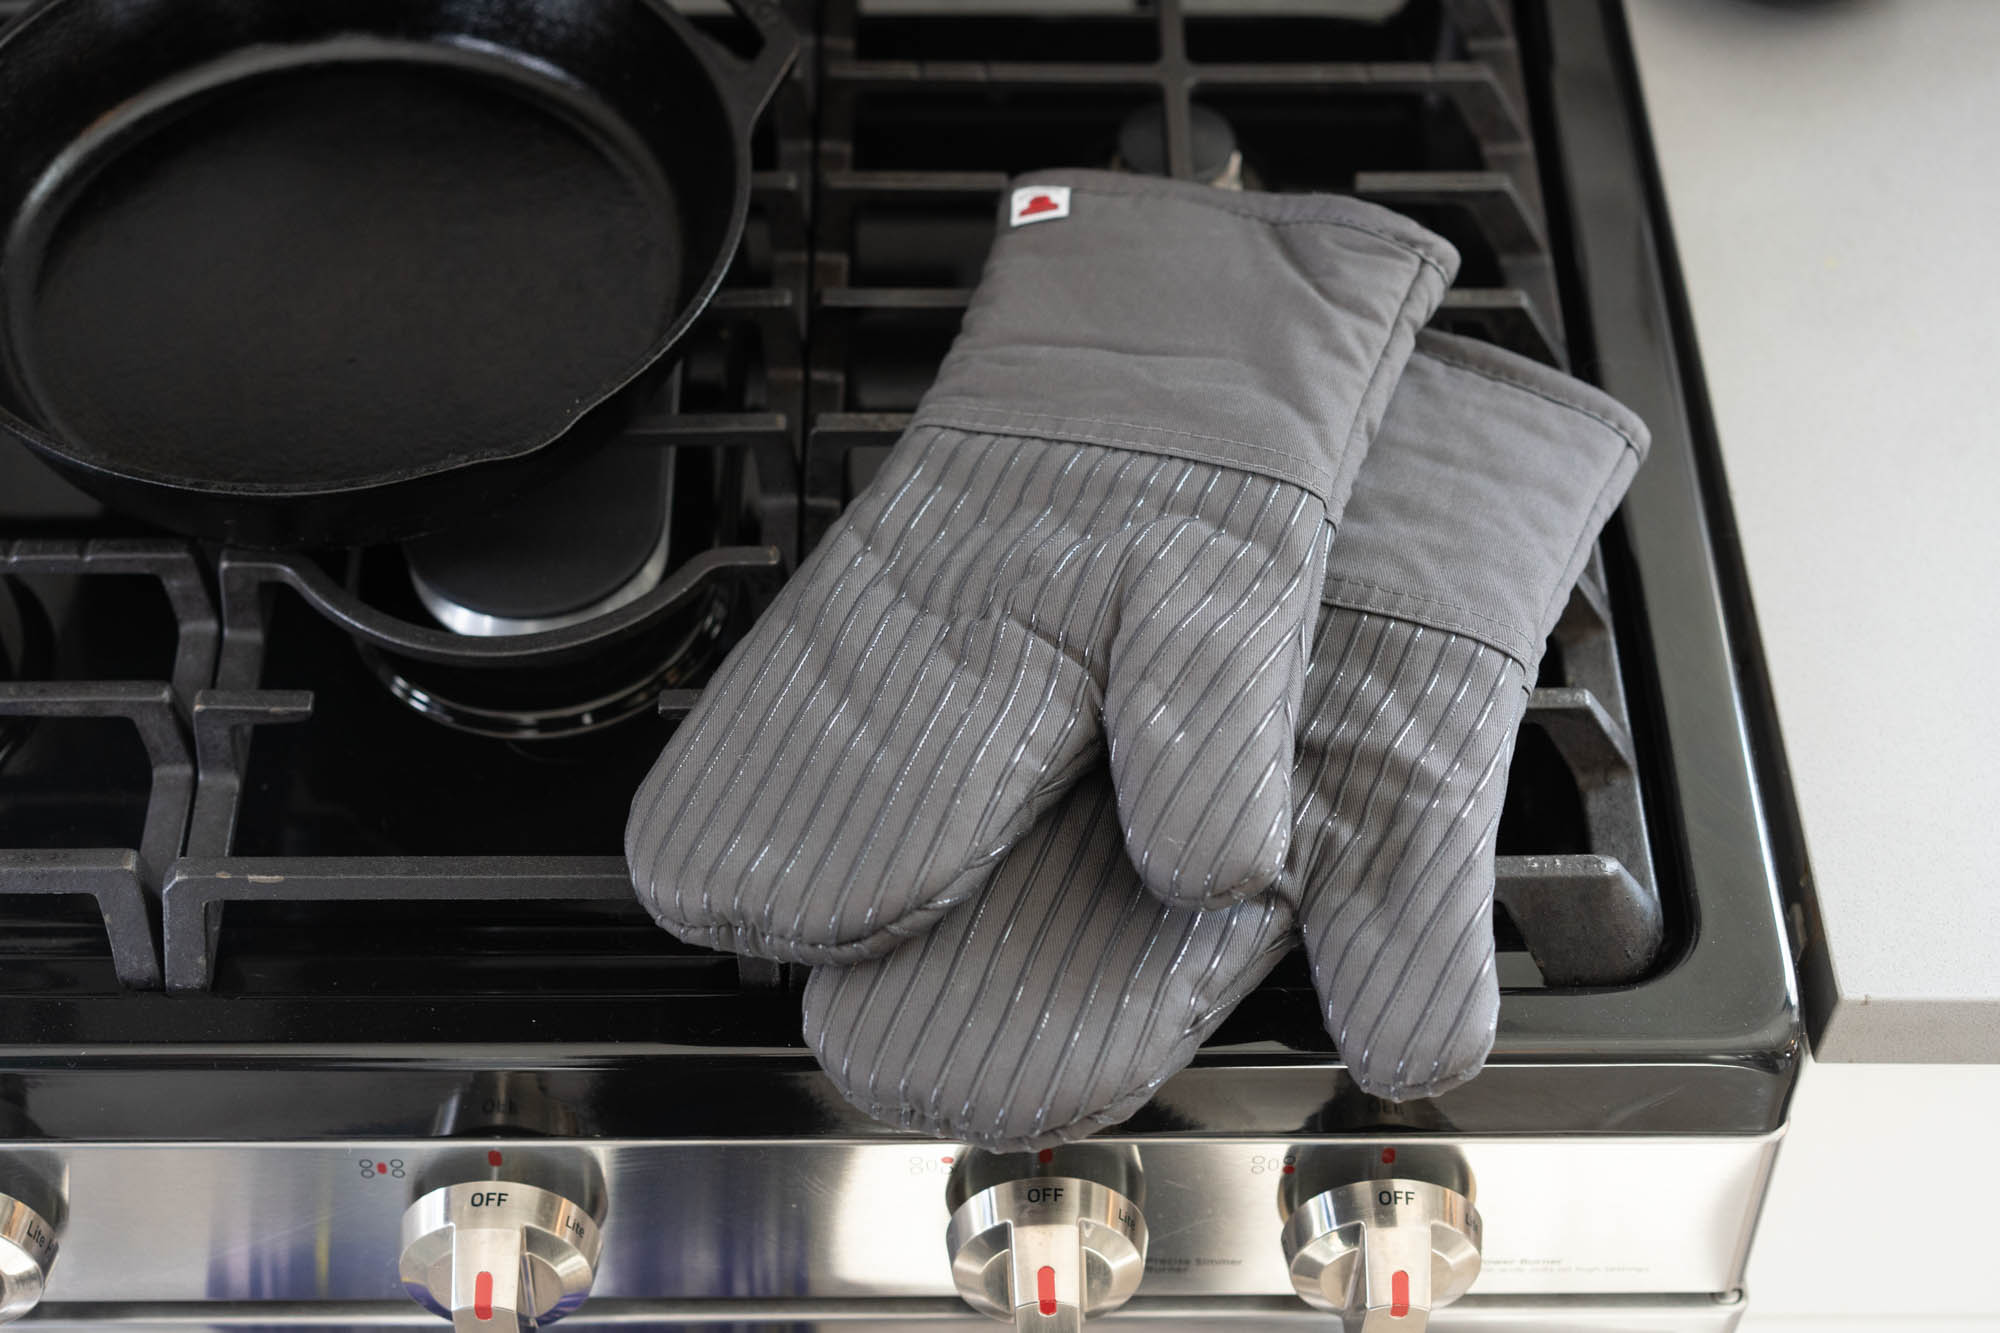 The Best Oven Mitts for Every Budget